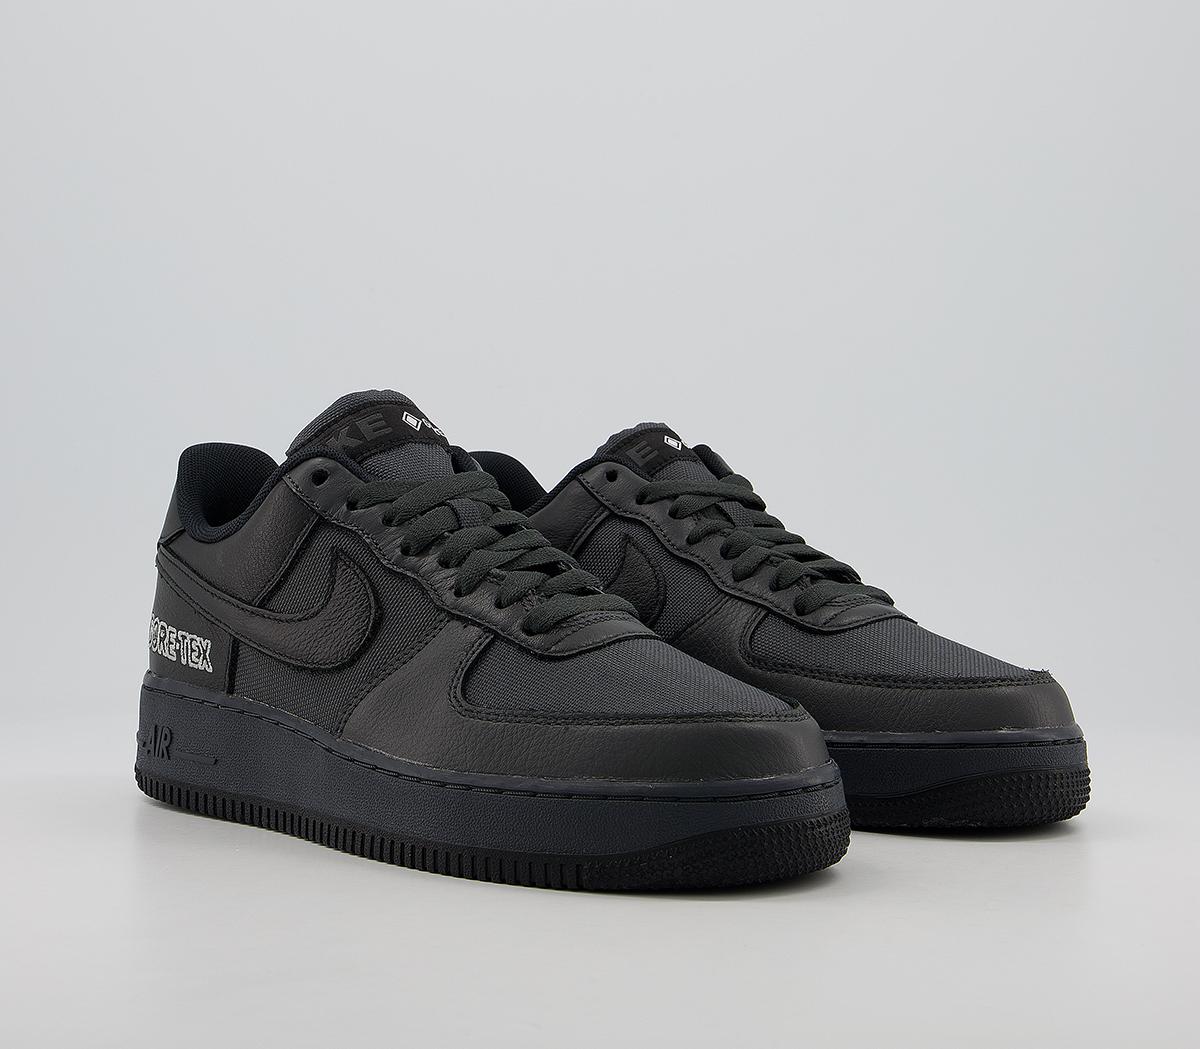 Nike Air Force 1 Gtx Trainers Anthracite Black Barely Grey - His trainers